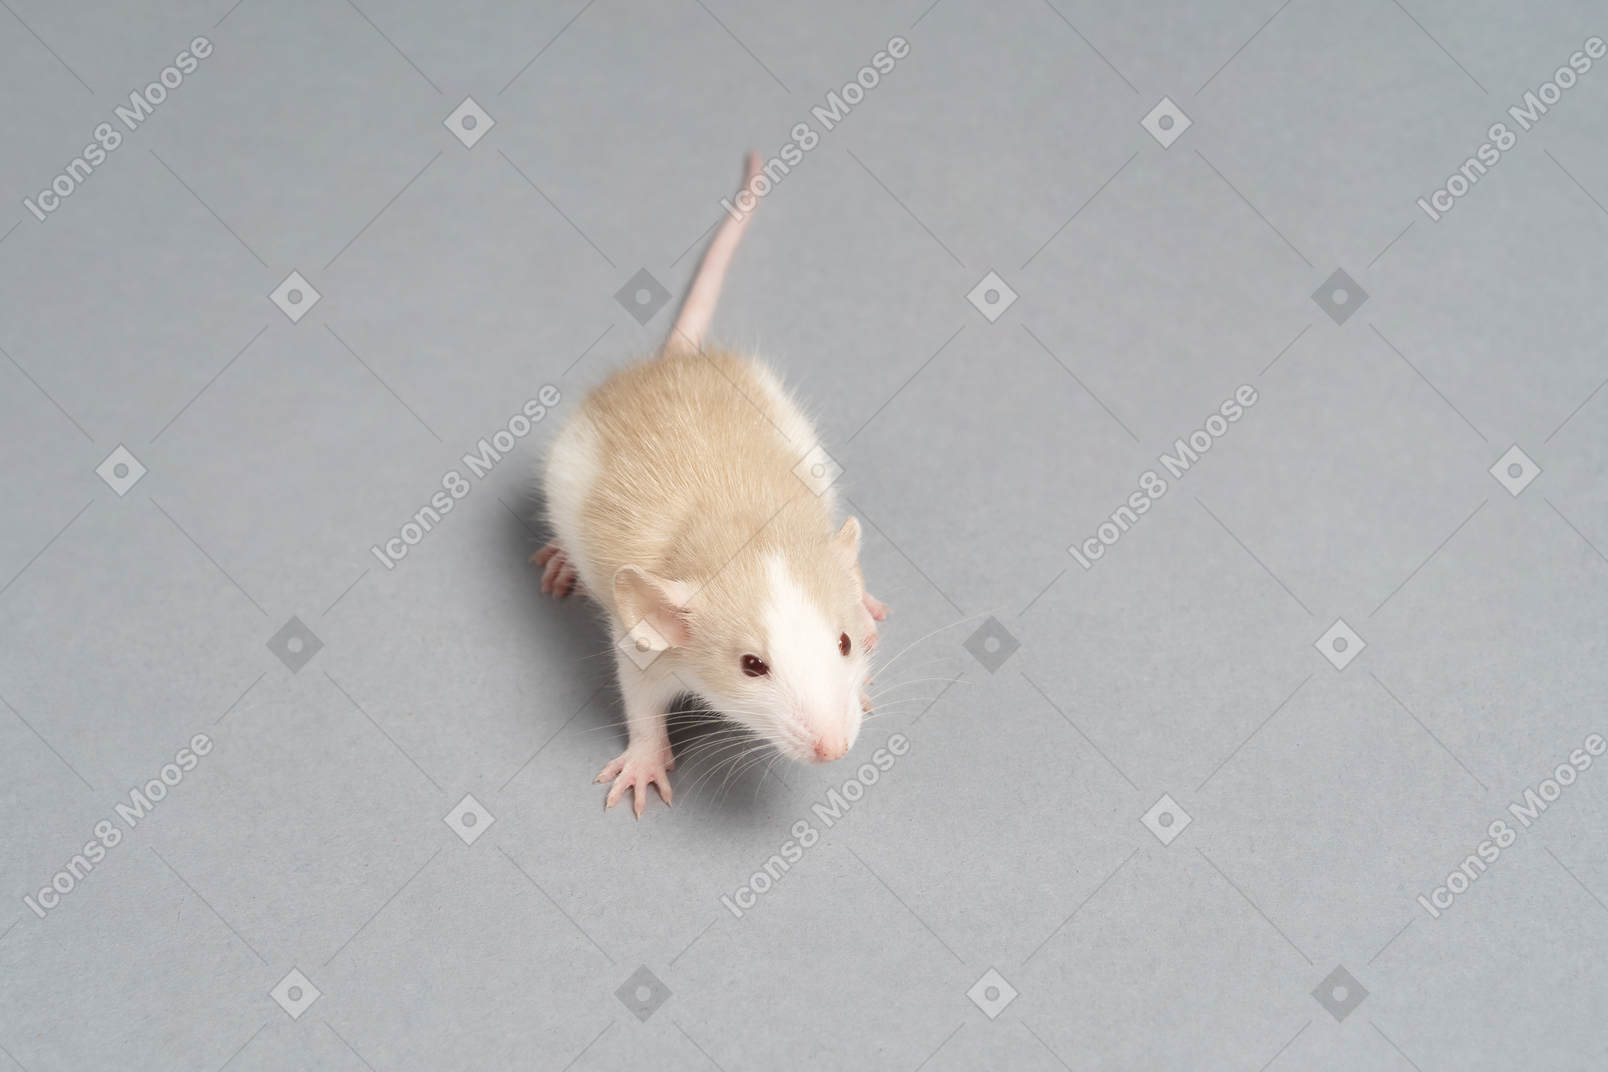 A cute gray mouse looking to camera